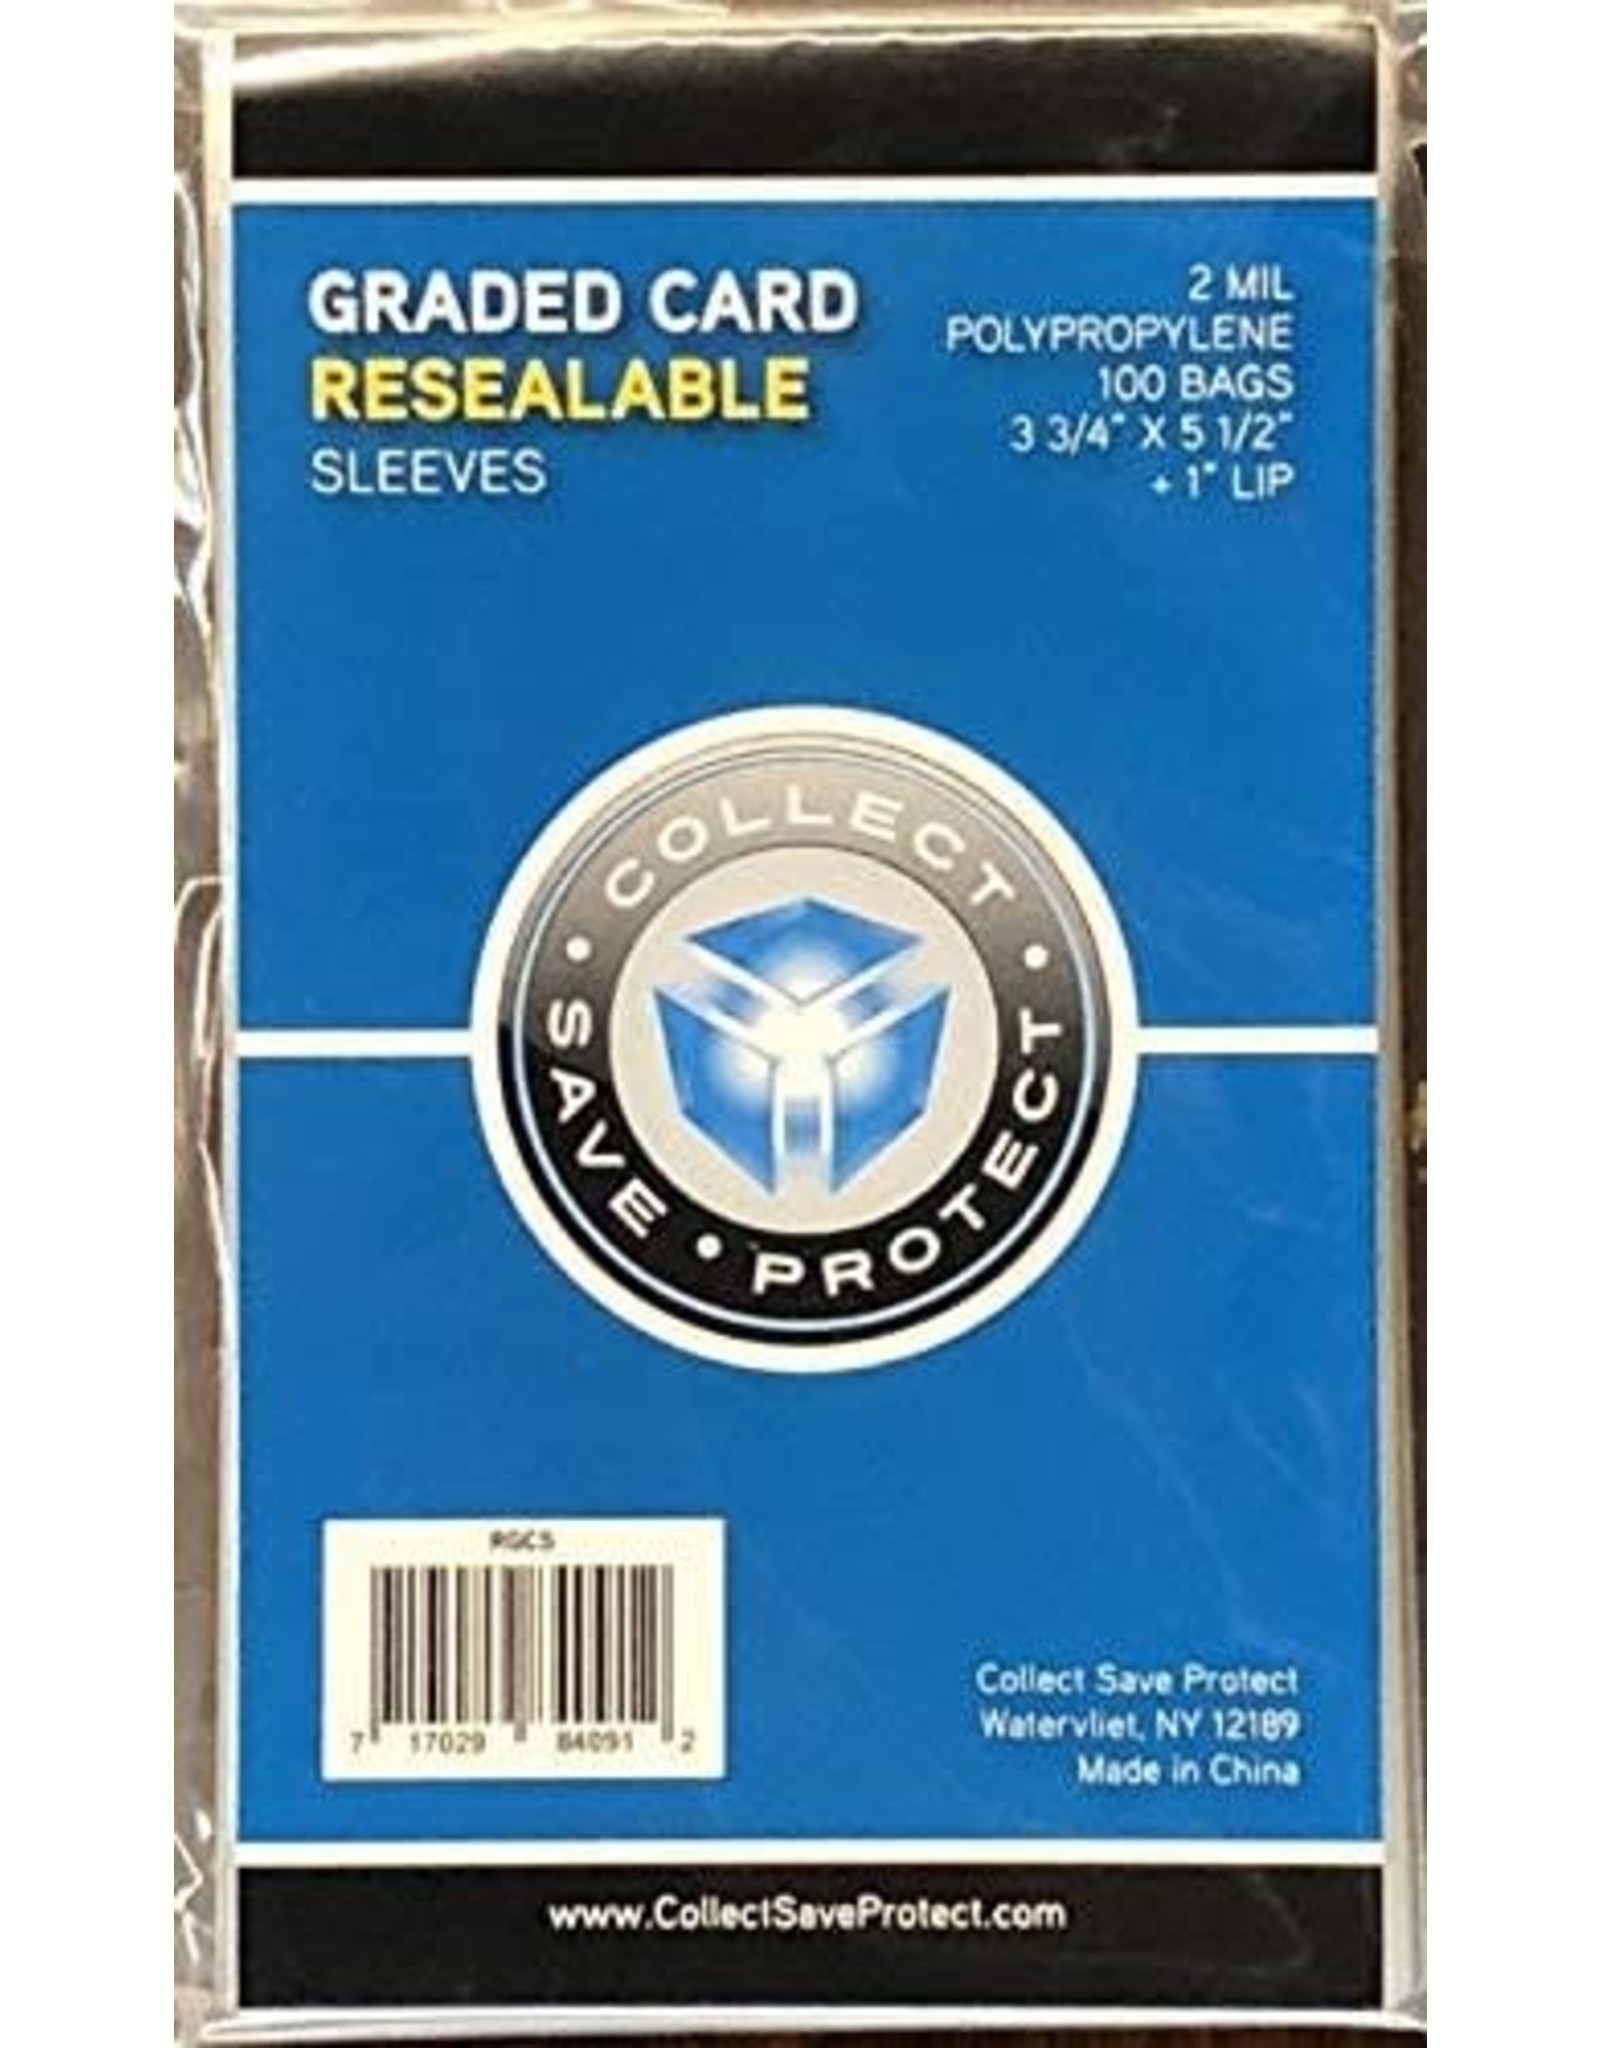 Collect Save Protect Grades Card Sleeves (100 ct)